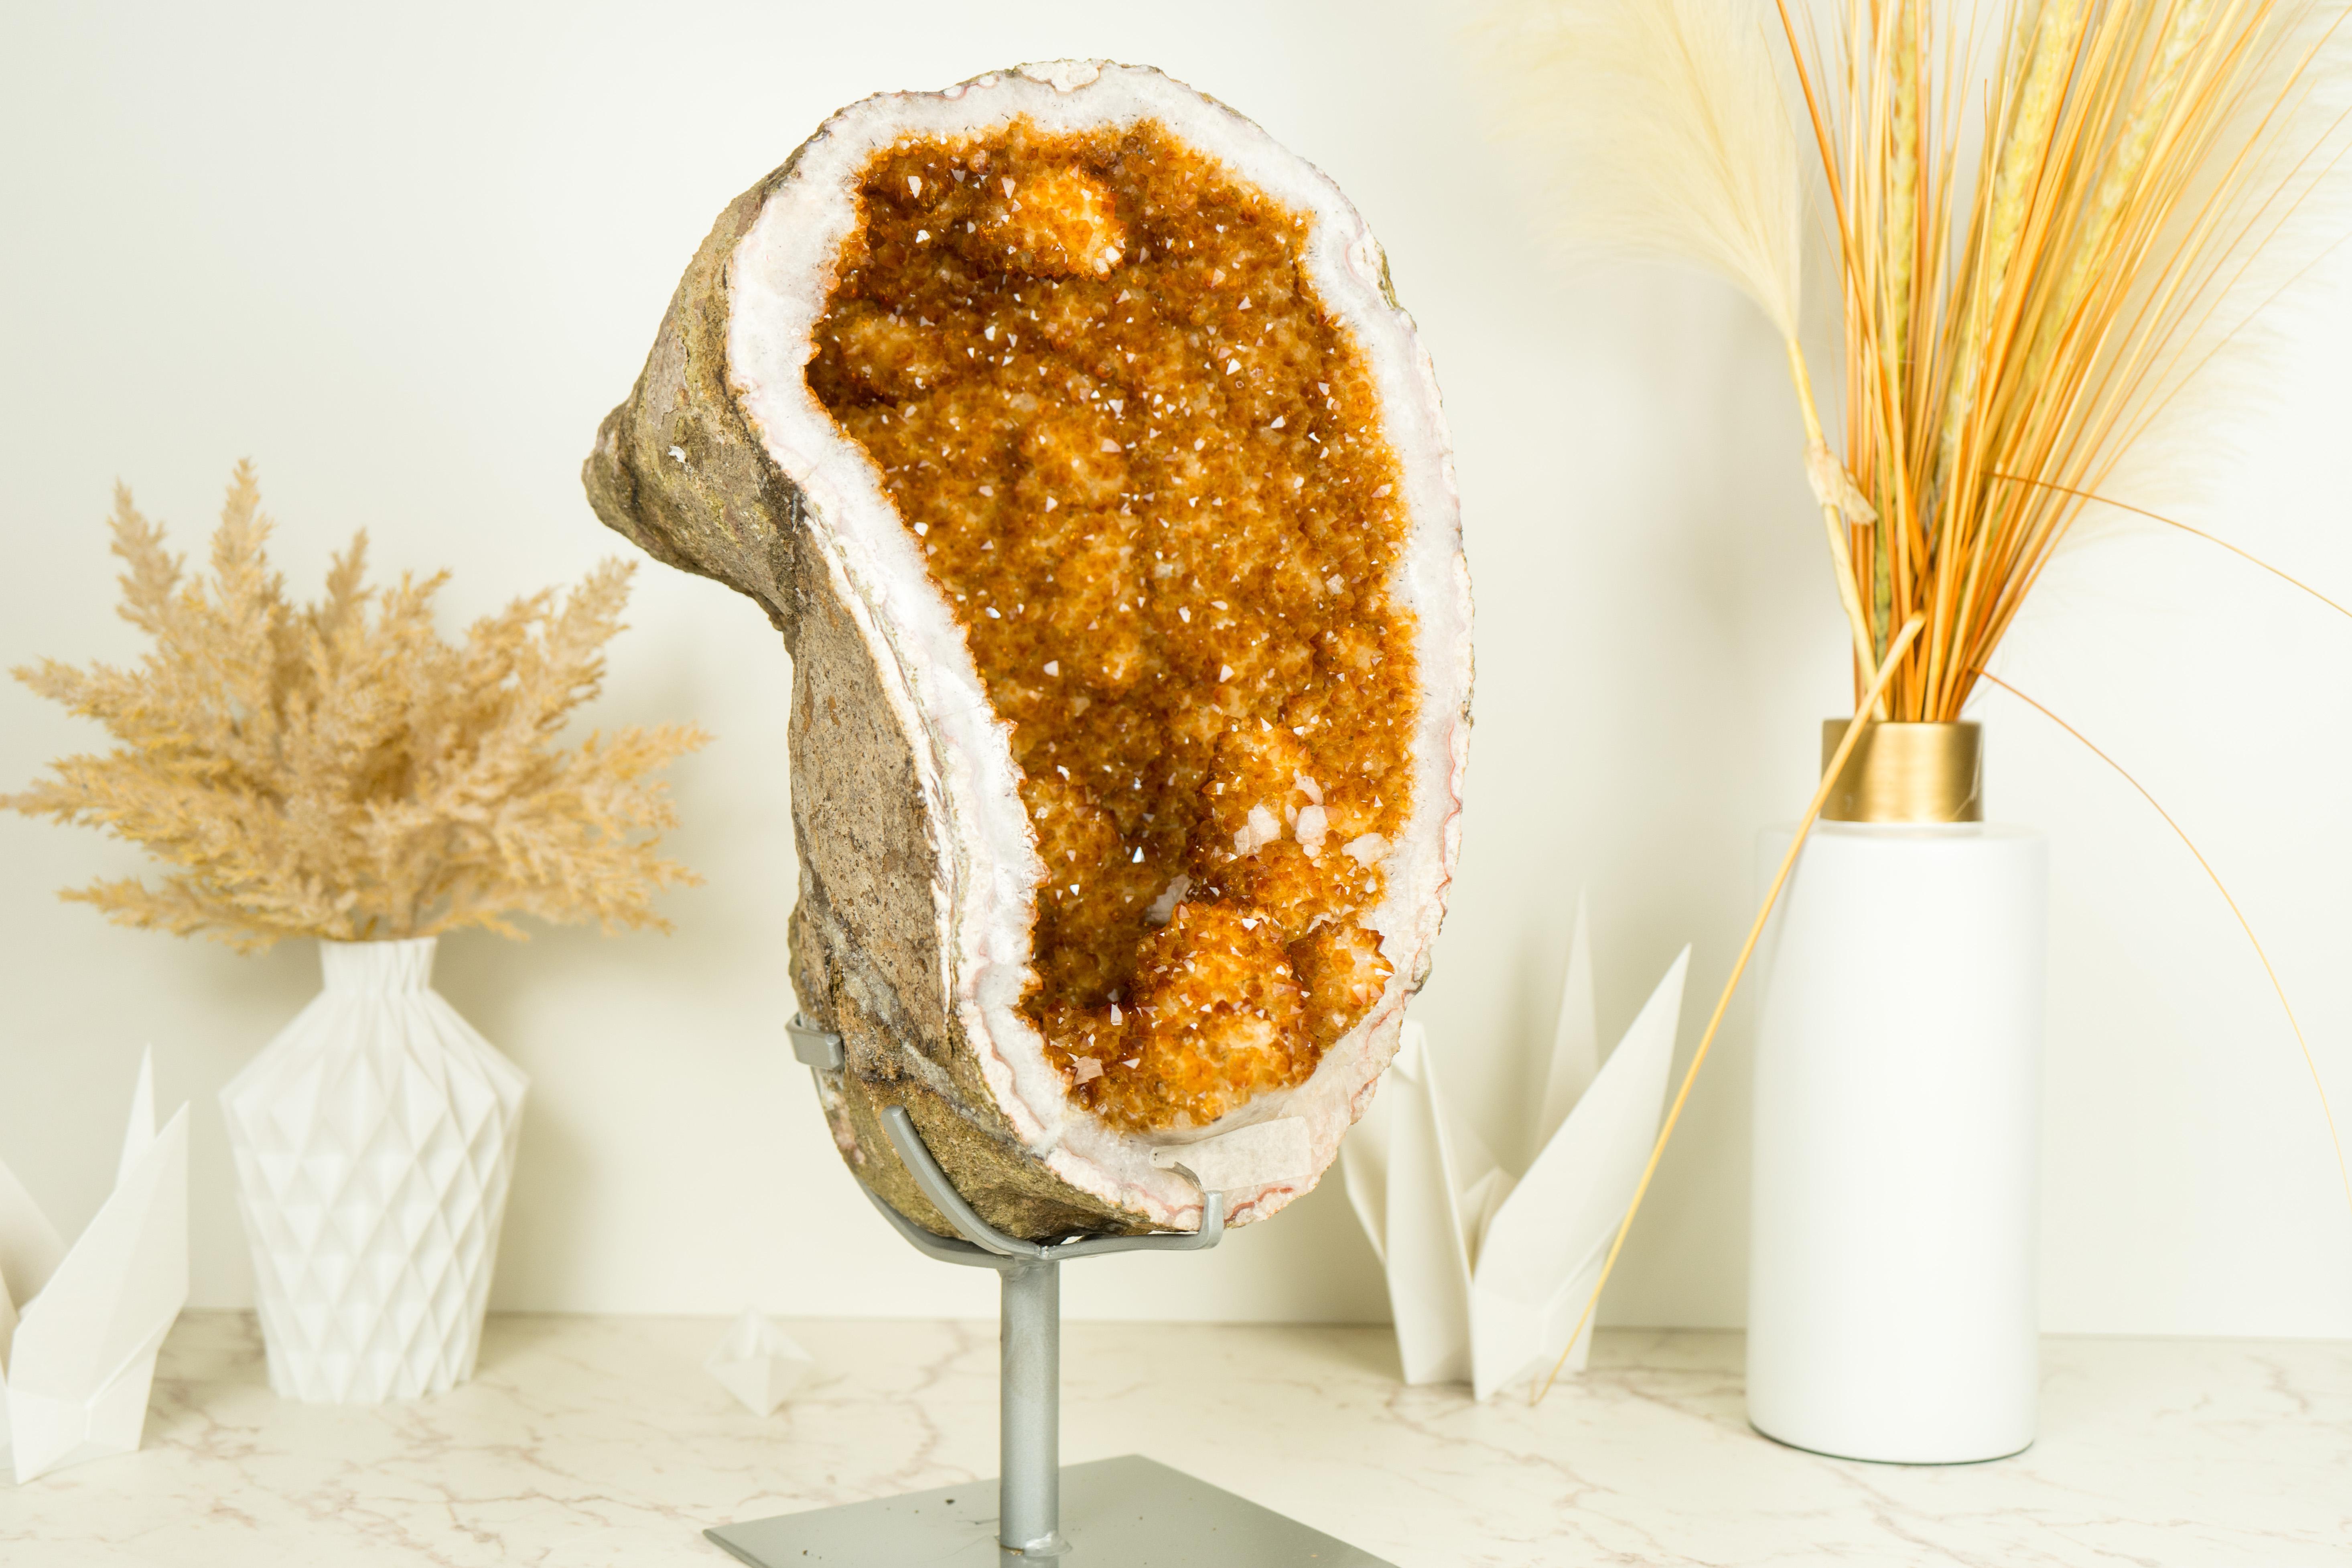 Contemporary Citrine Geode with Stalactite Flower Formations and Deep Orange Citrine Crystal For Sale